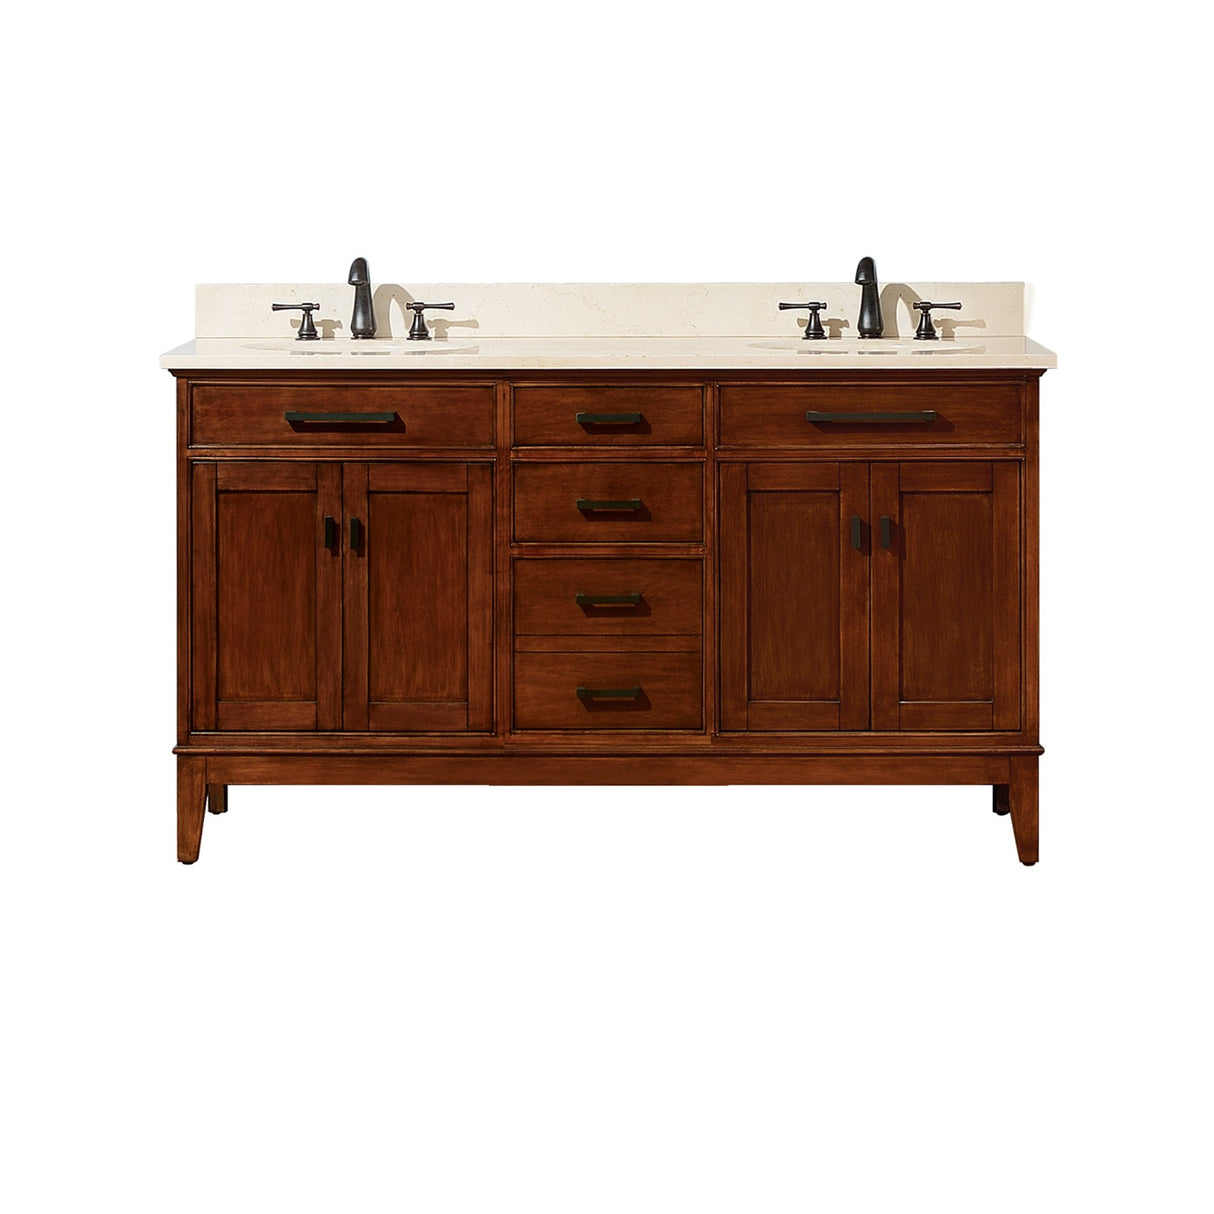 Avanity Madison 61 in. Double Vanity in Tobacco finish with Crema Marfil Marble Top